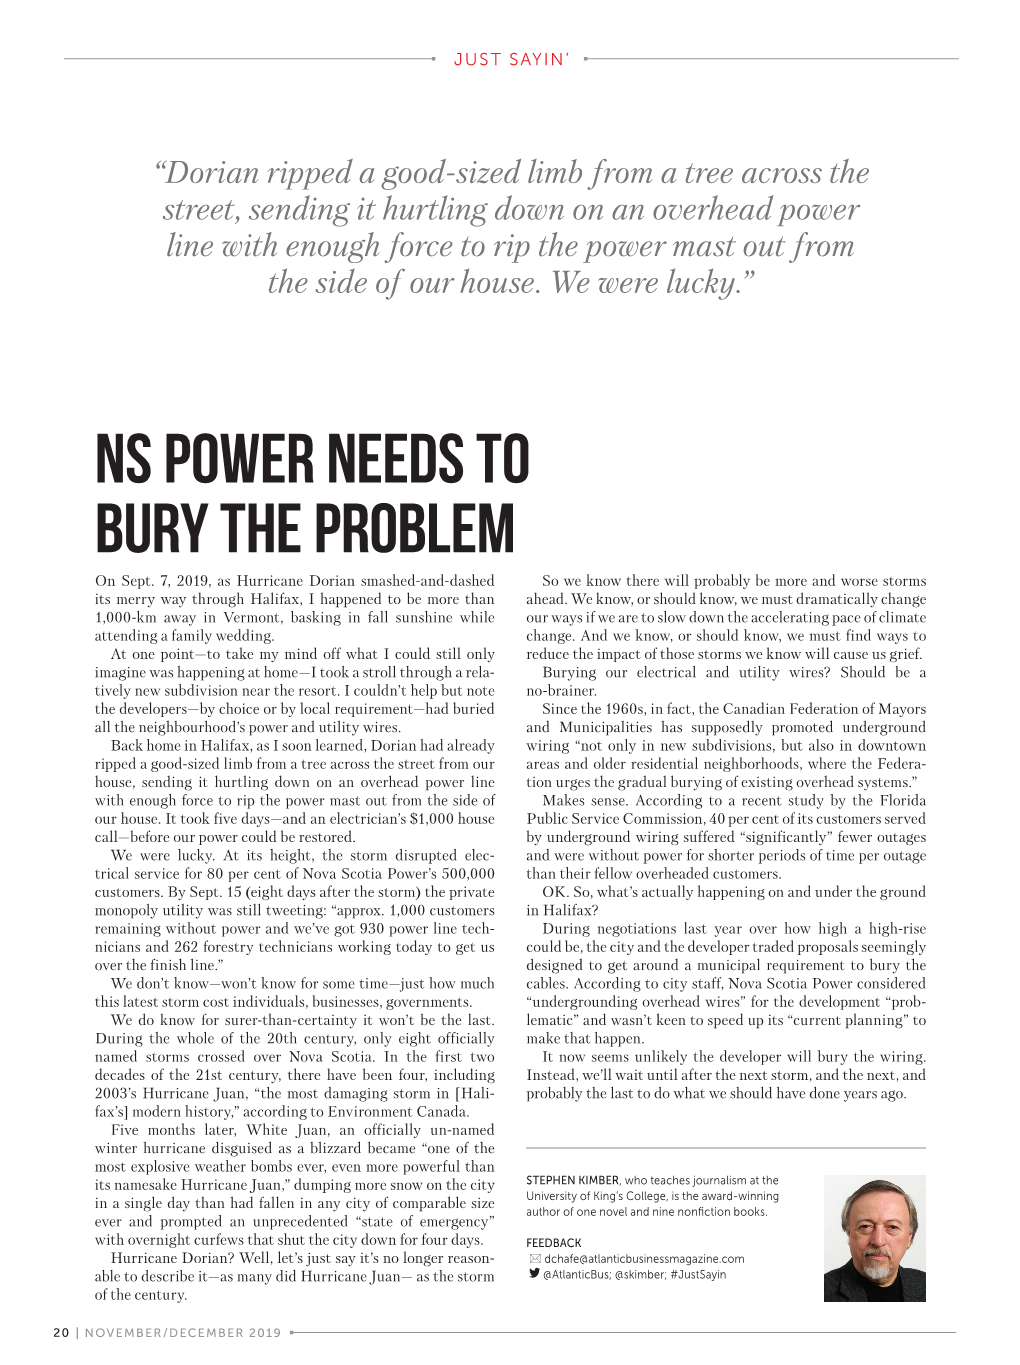 NS Power Needs to Bury the Problem on Sept